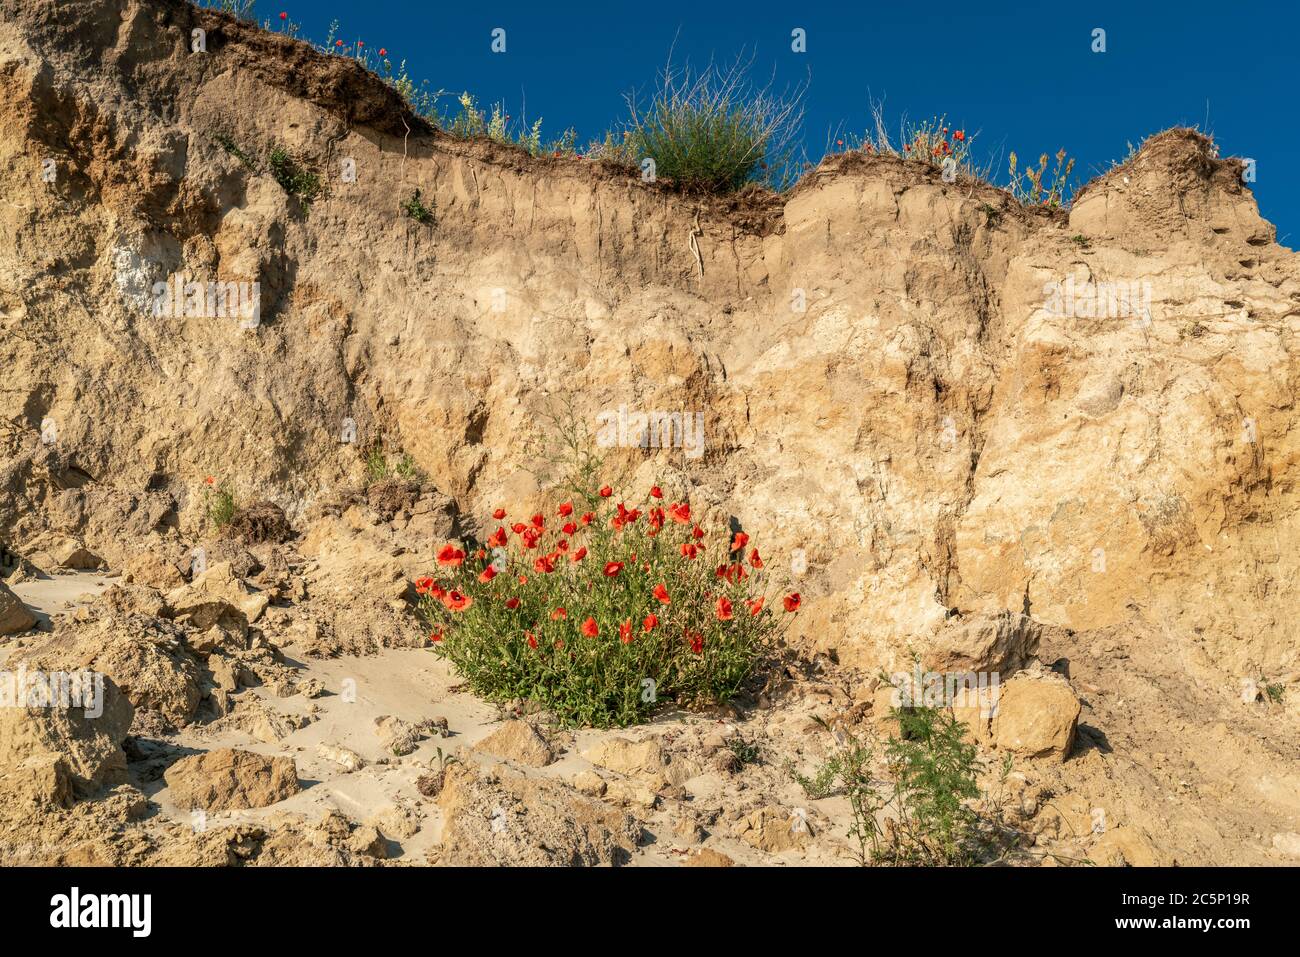 Red poppies growing on the chalk cliffs of the baltic sea island Ruegen Stock Photo